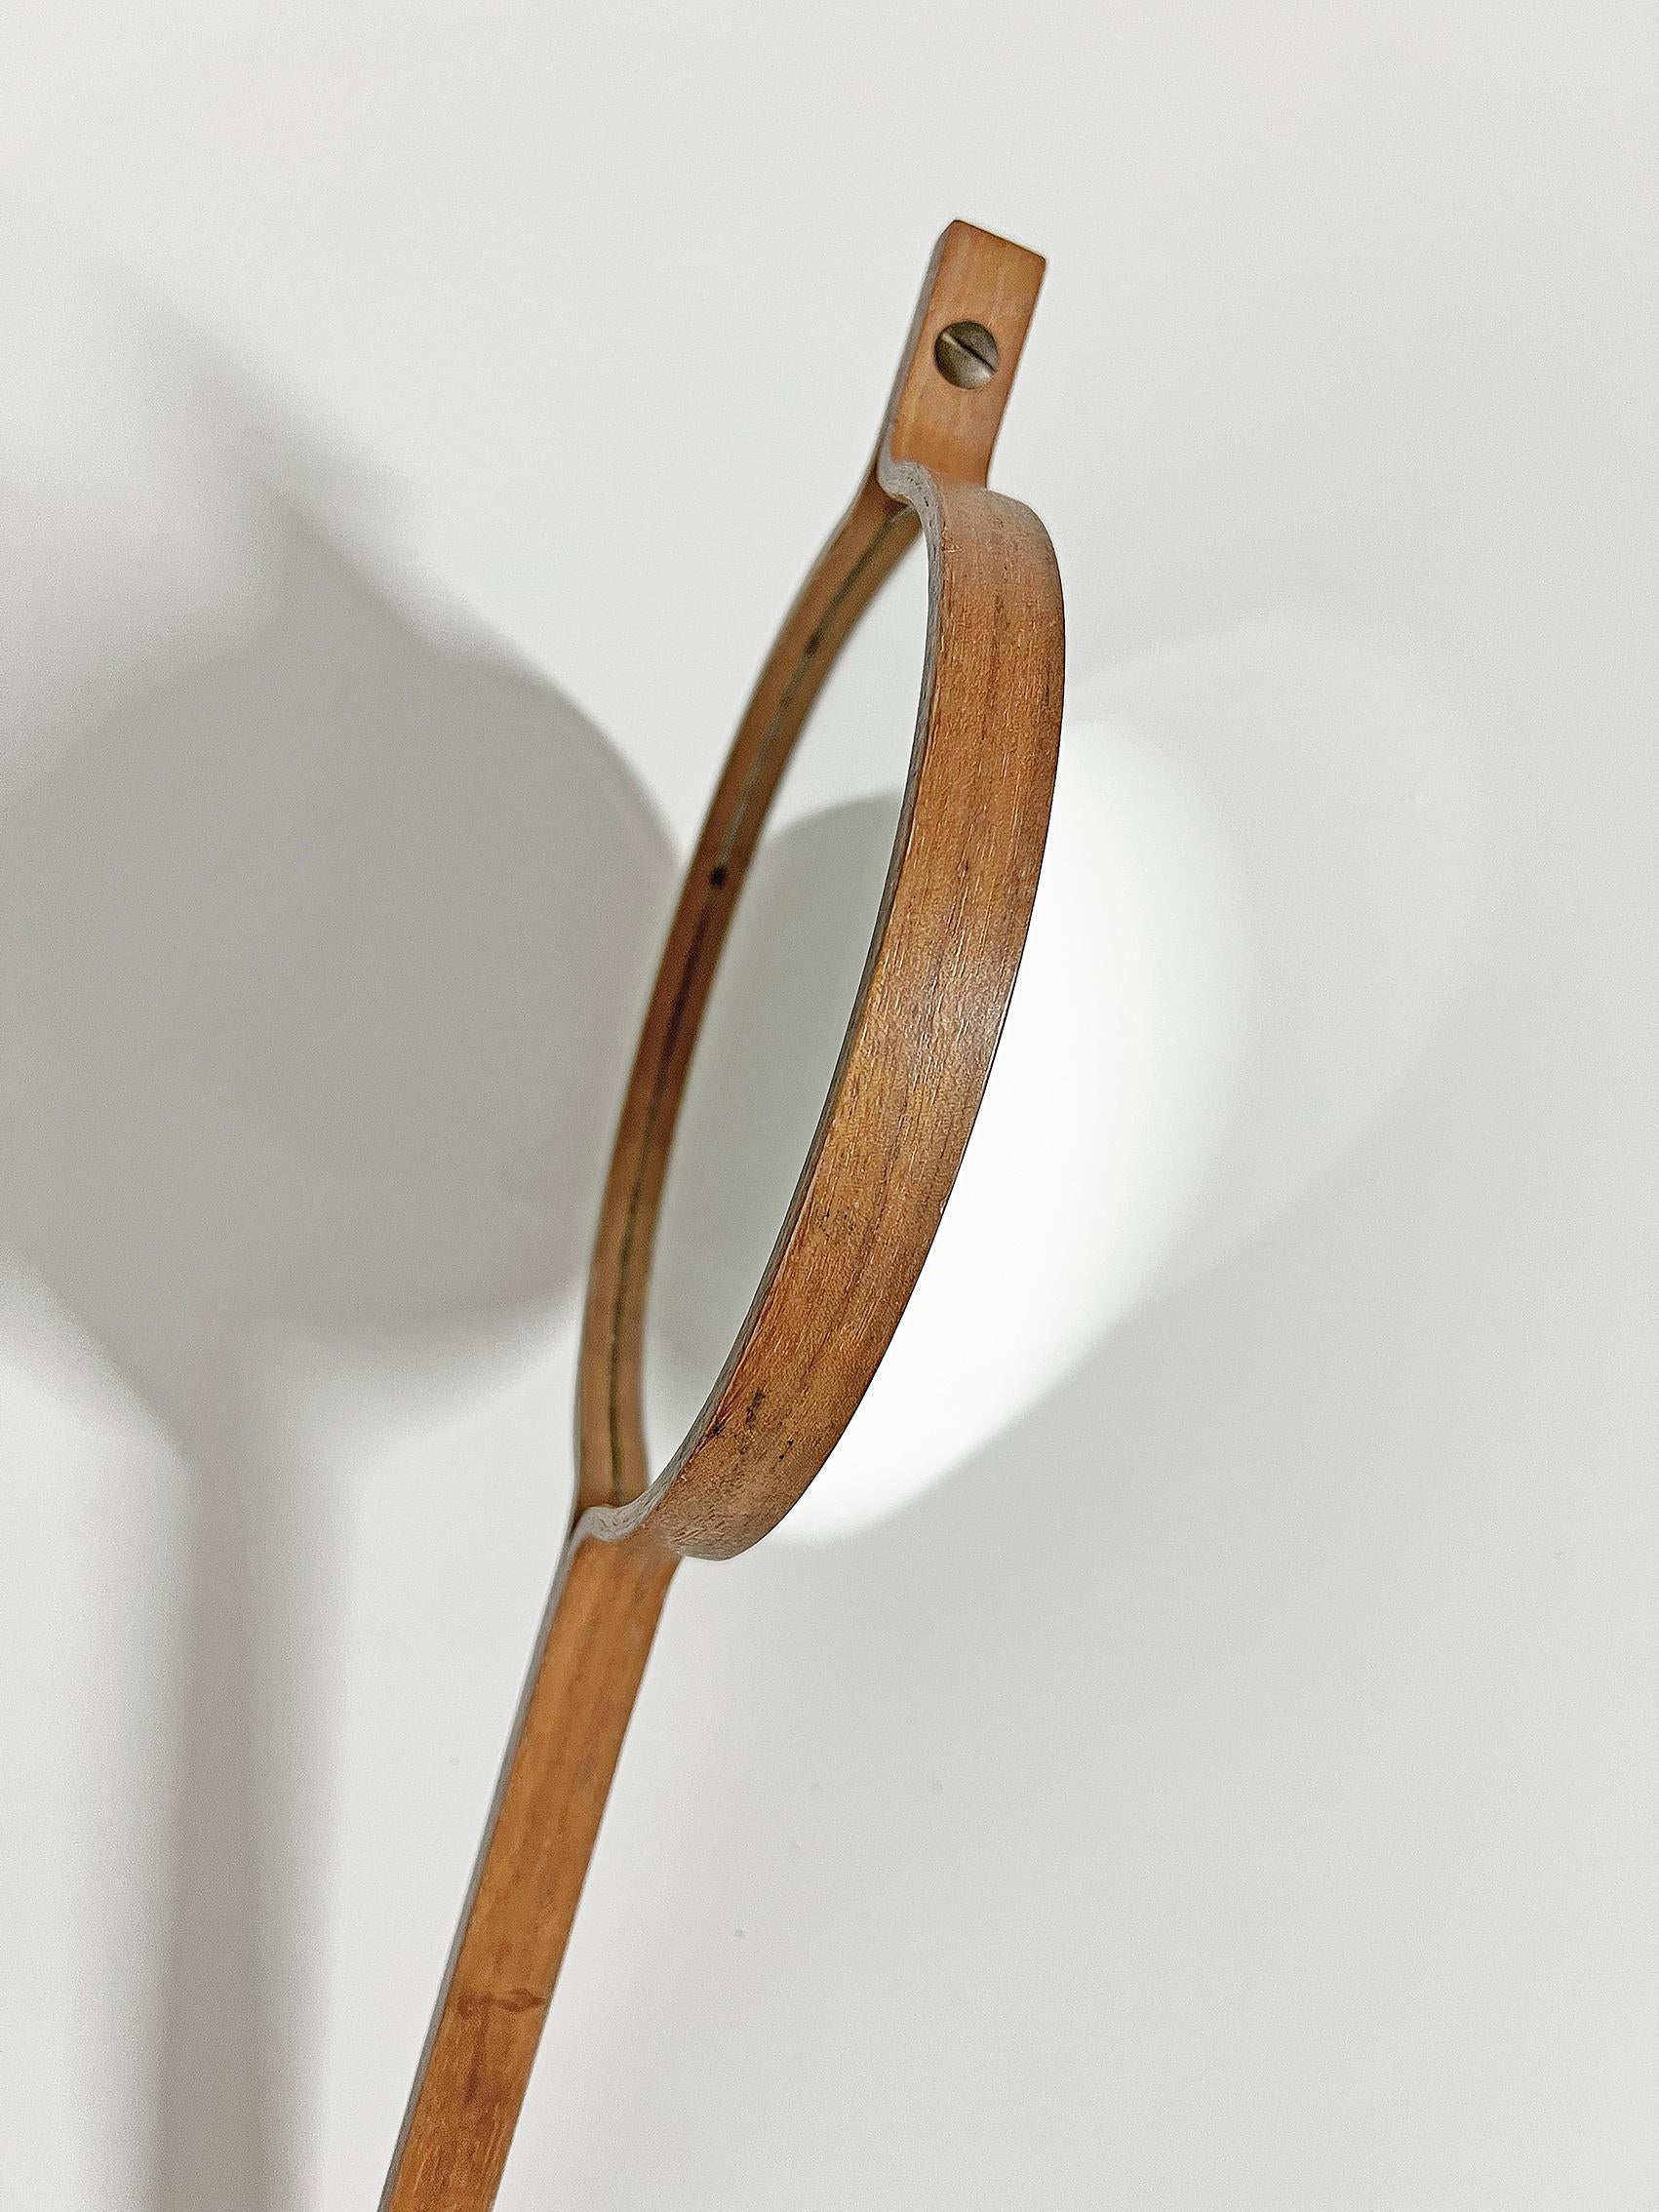 Hand/Wall Mirror in Teak by Bech & Starup Denmark -1960s For Sale 2